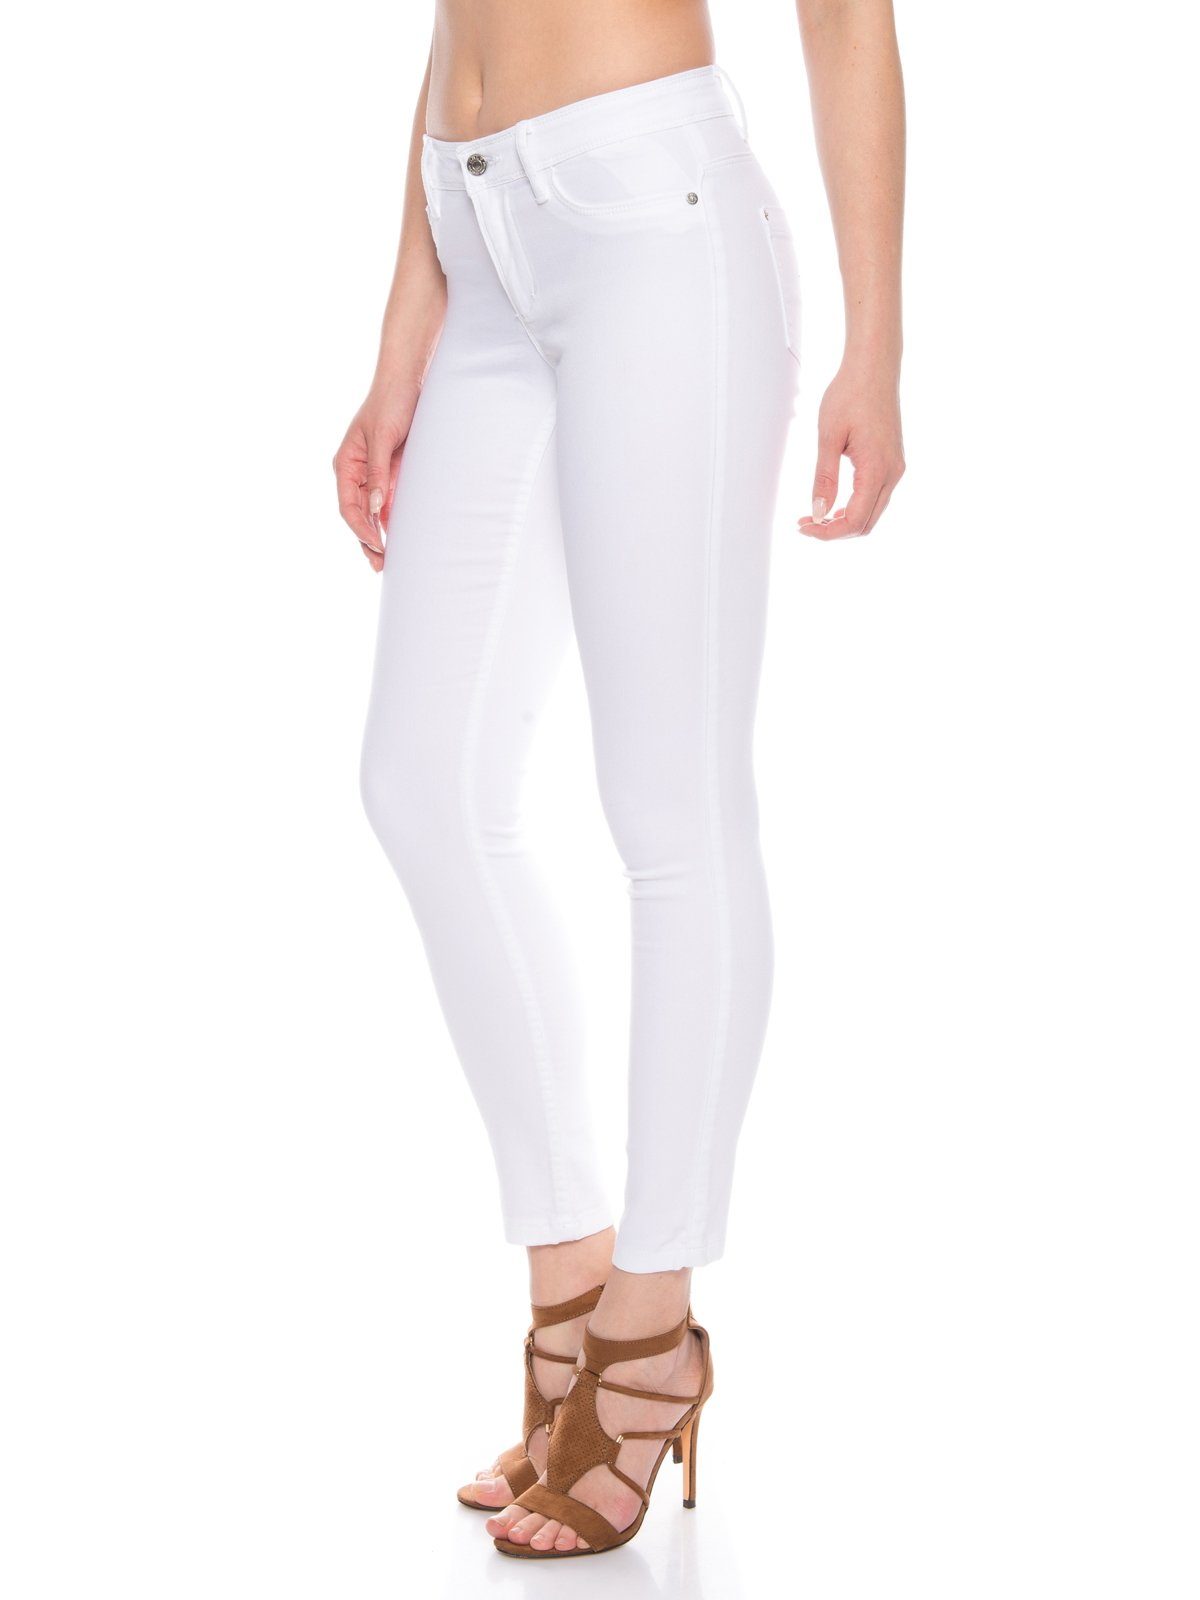 ONLY Stretch-Jeans Only Damen Skinny Jeans Hose mit Stretch in weiß  Regulare Leibhöhe